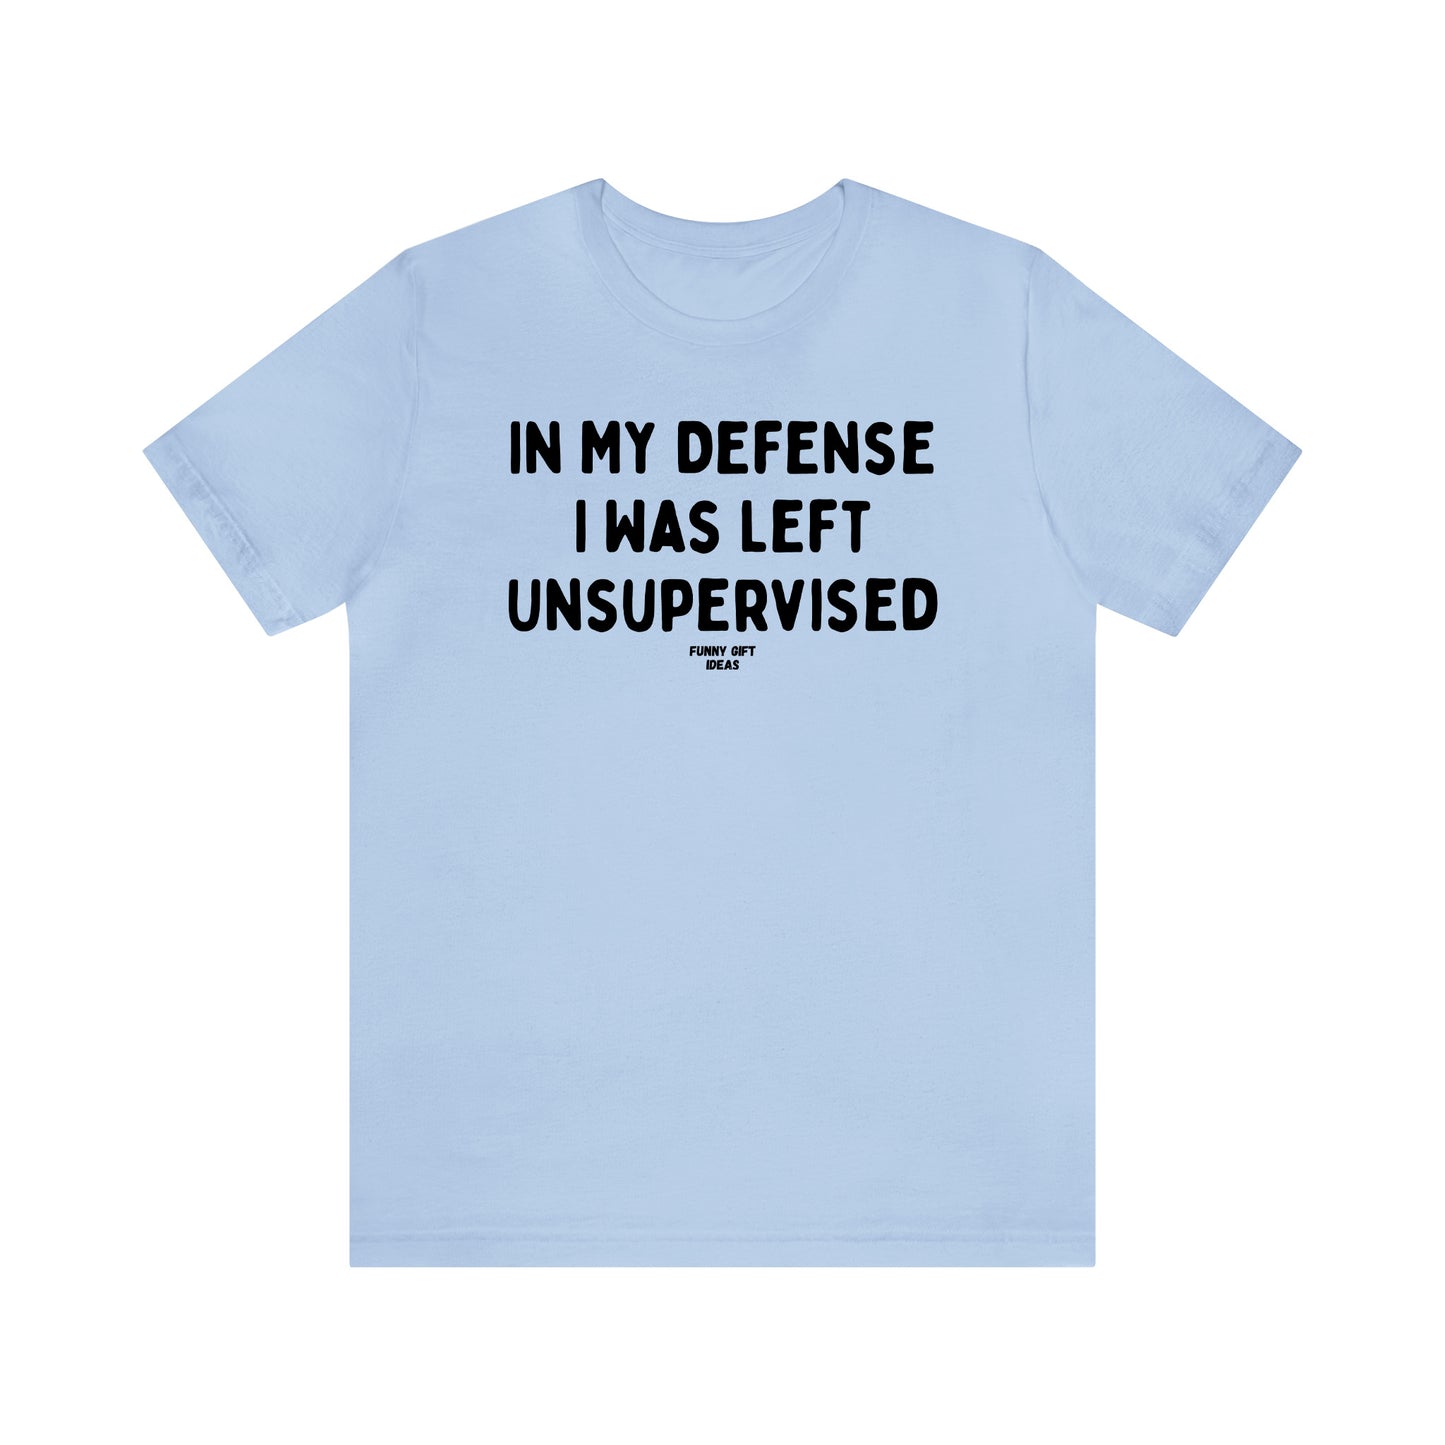 Funny Shirts for Women - In My Defense I Was Left Unsupervised - Women's T Shirts